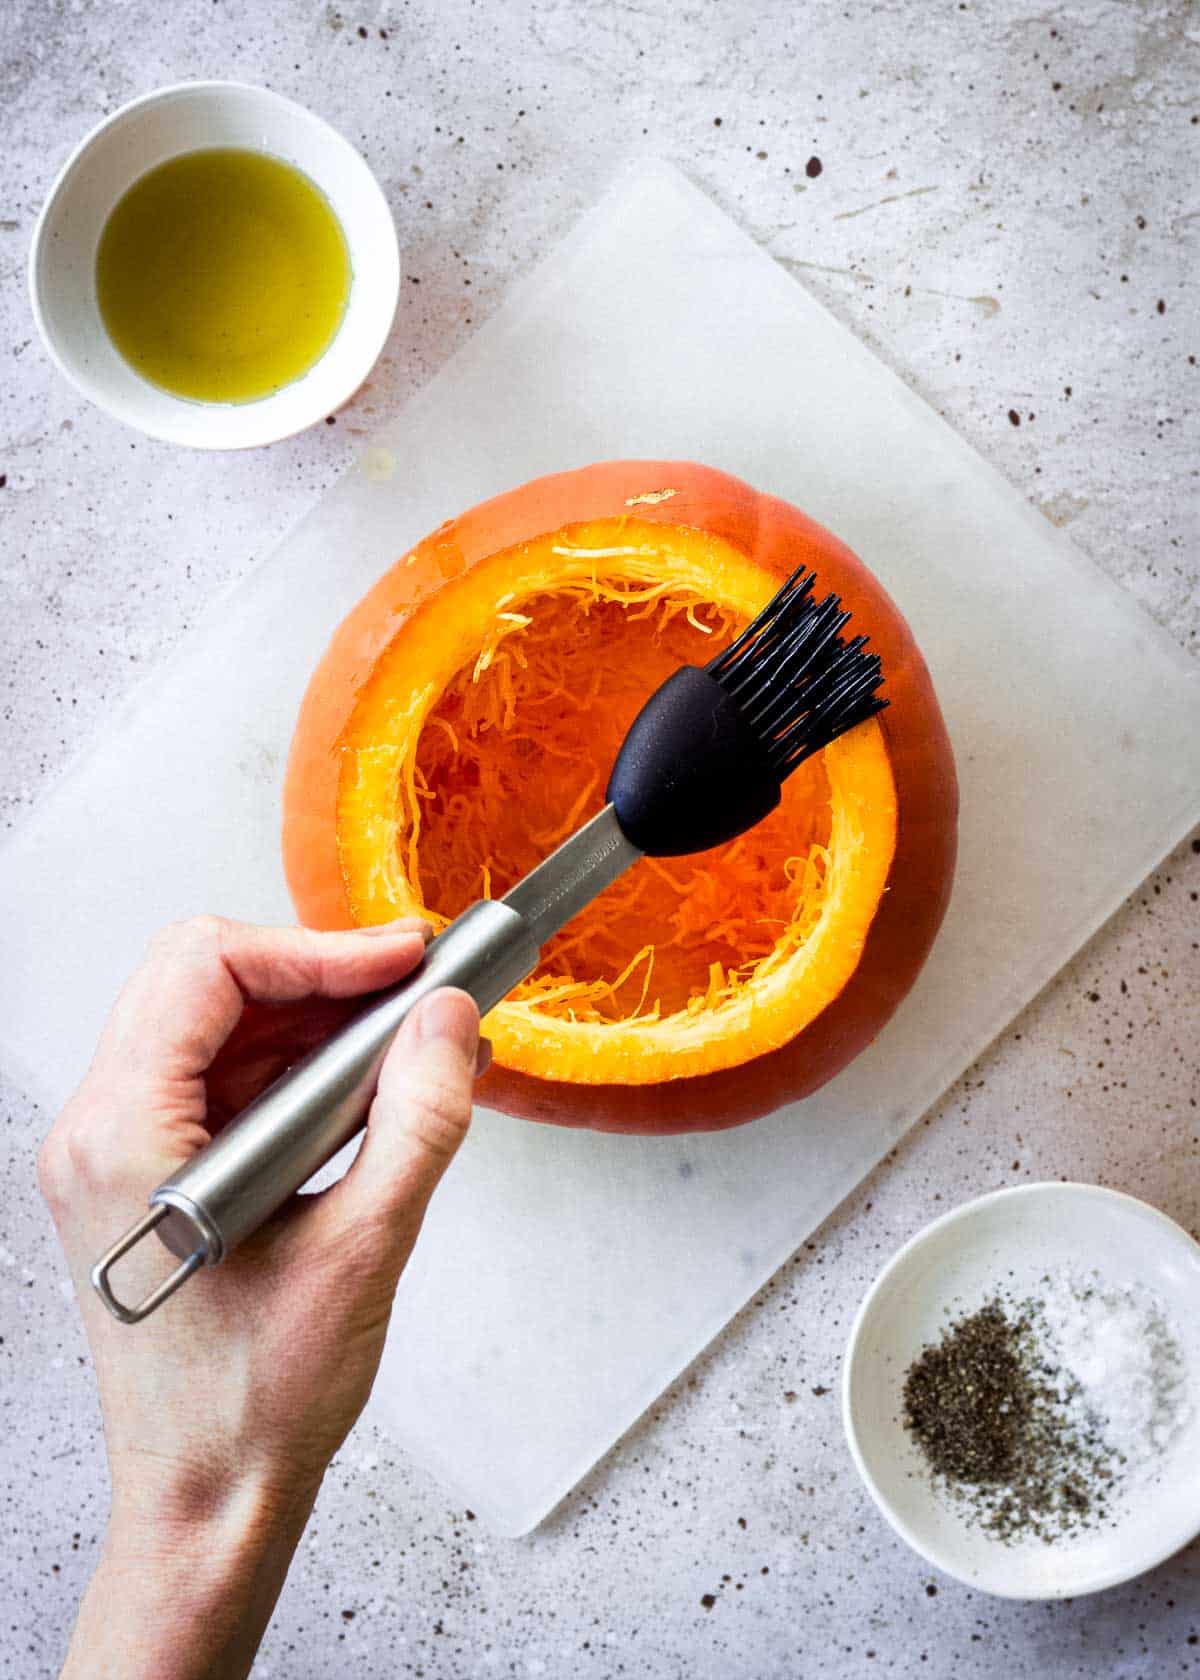 Woman's hand brushing hollowed pumpkin with olive oil.